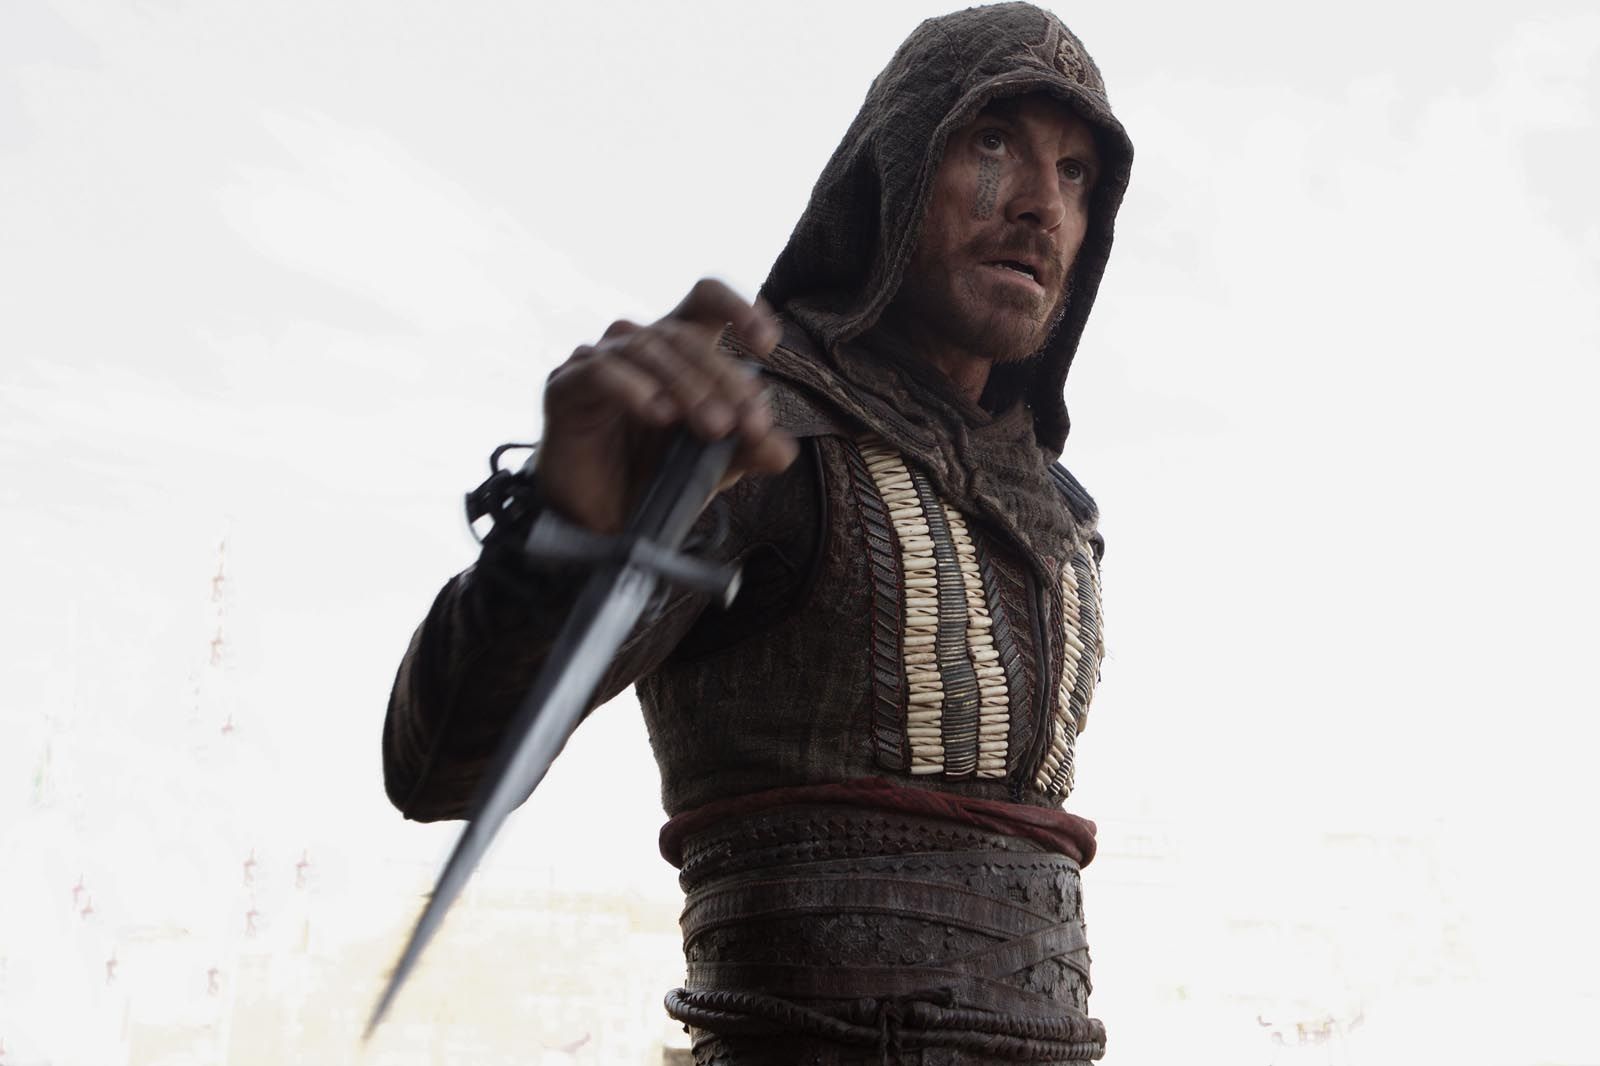 Assassin's Creed images with Michael Fassbender